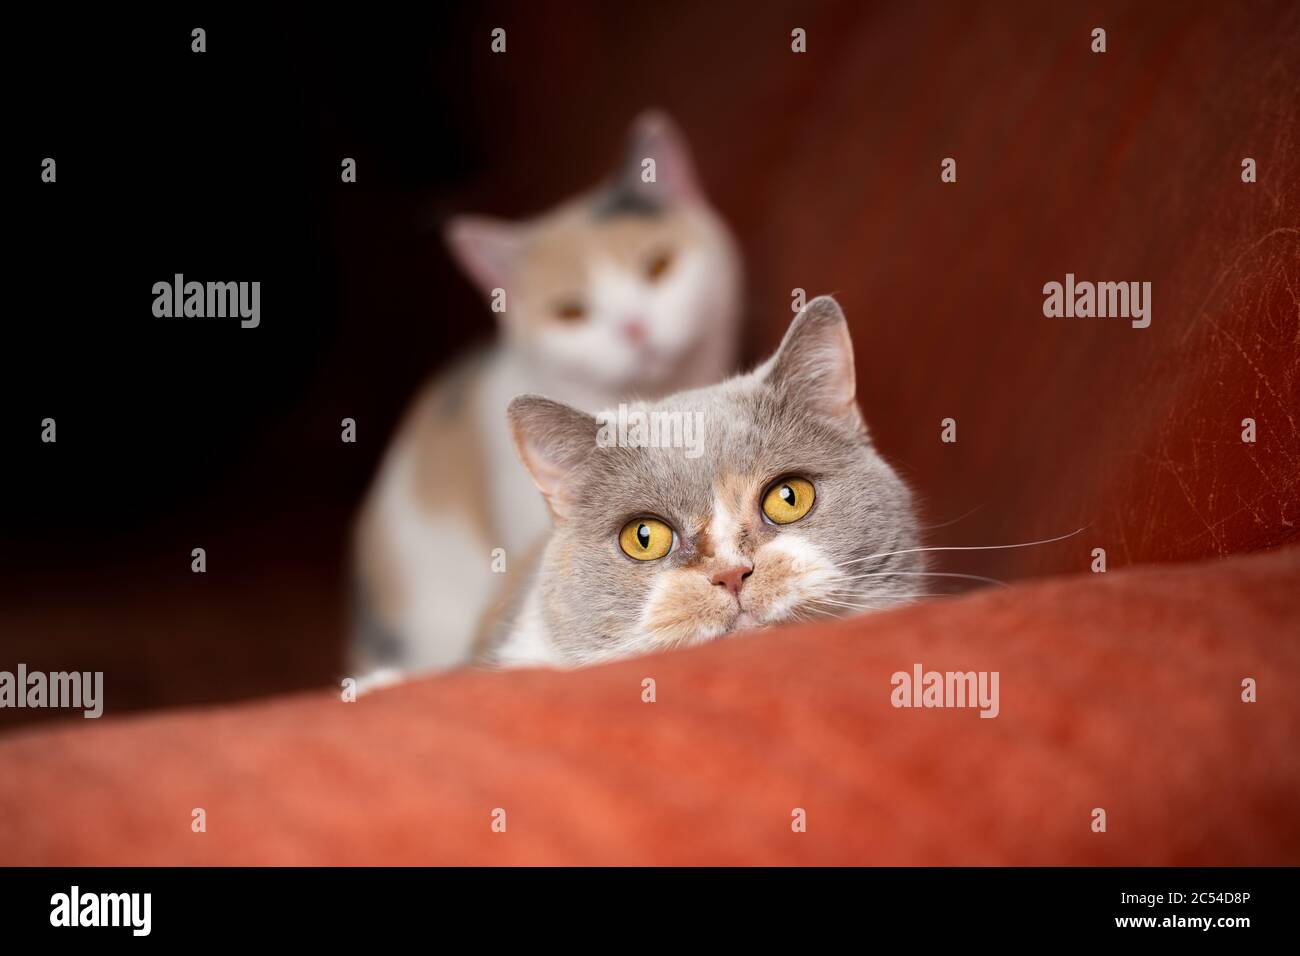 two playful british shorthair cats on red sofa looking at camera curiously Stock Photo